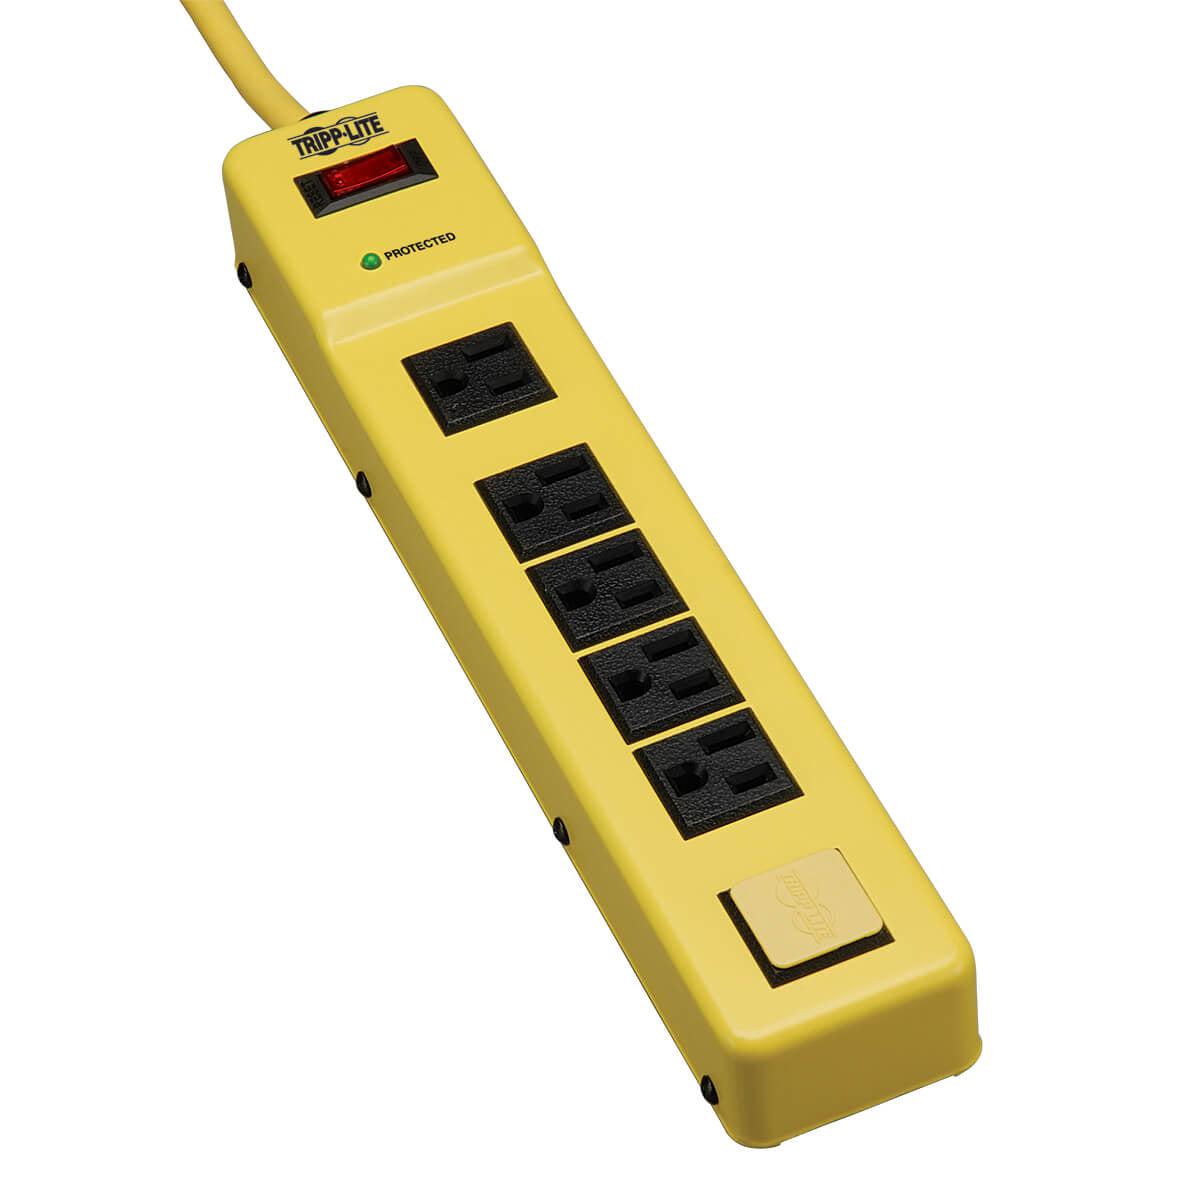 Tripp Lite Tlm626Sa Surge Protector Yellow 6 Ac Outlet(S) 120 V 1.8 M